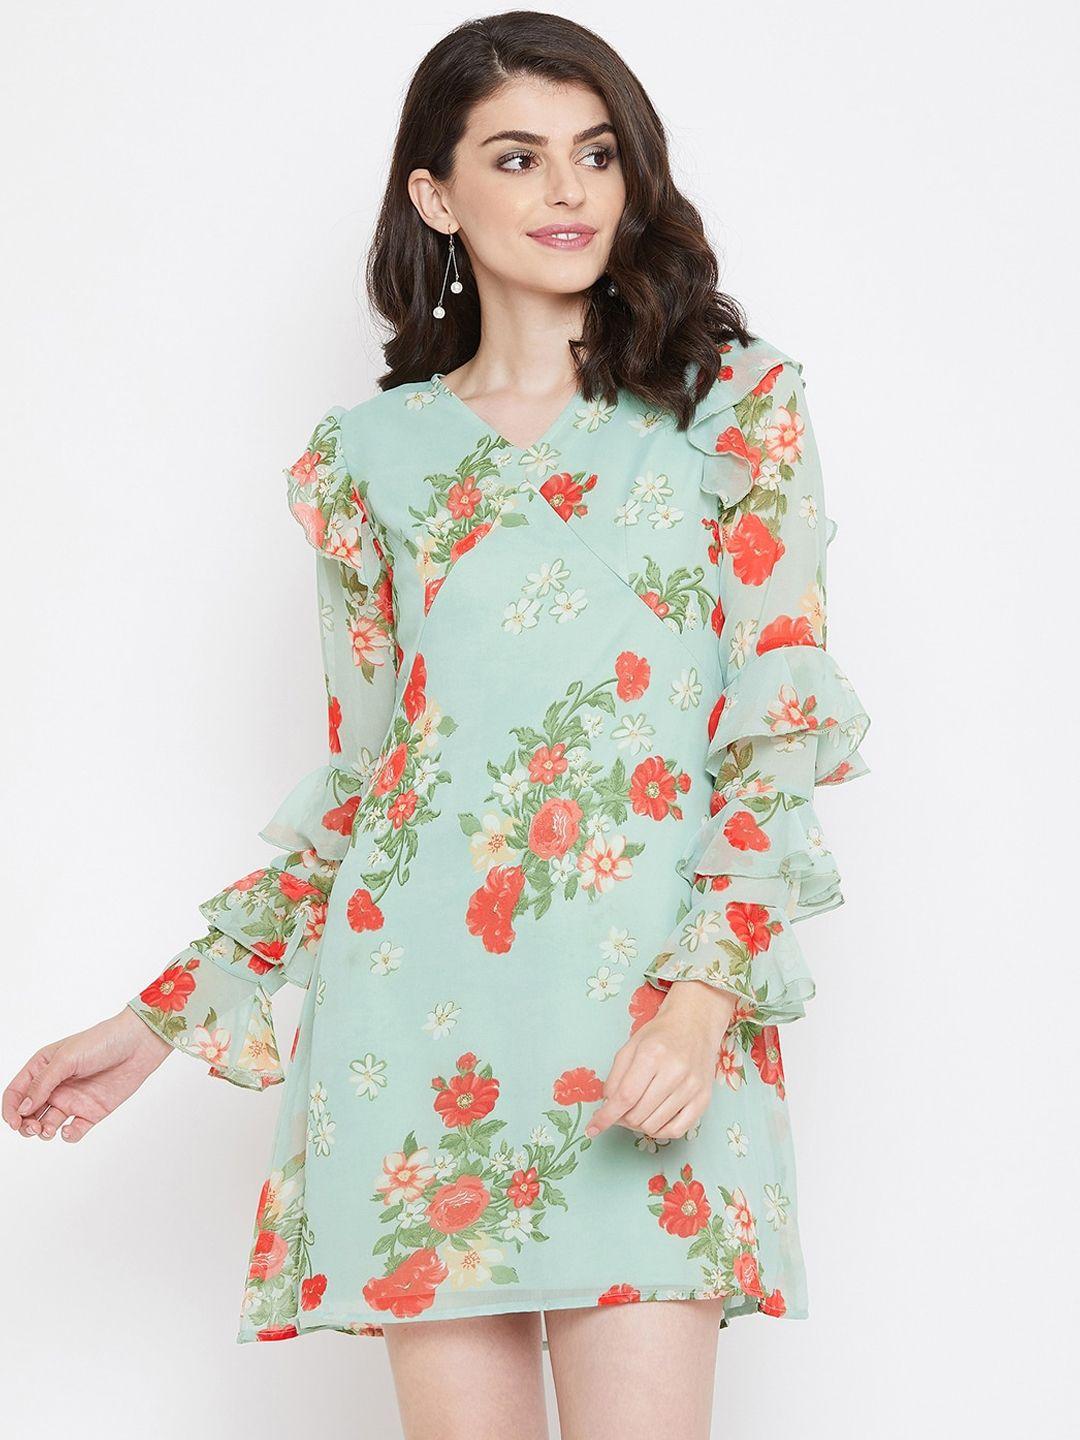 la-zoire-women-sea-green-and-red-floral-printed-georgette-a-line-dress